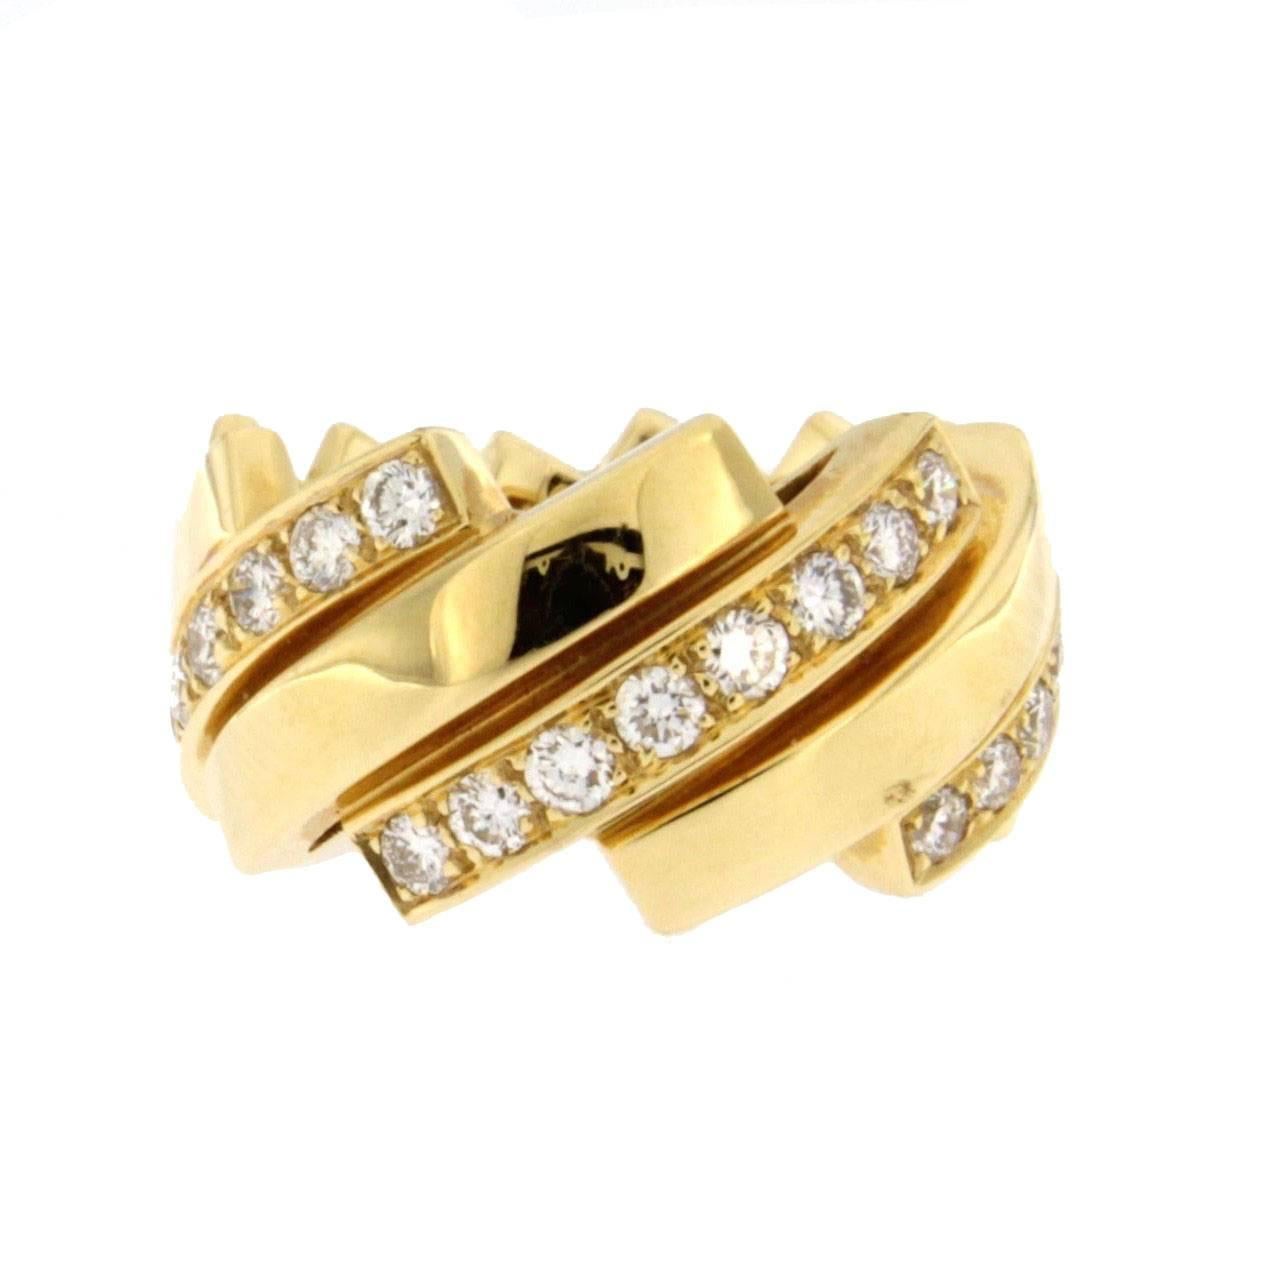 Alex Jona design collection, hand crafted in Italy, 18 karat yellow gold band ring, consisting of a sequence of oblique stripes accented with white diamonds weighing 0.97 carats.  Size US 6.5, can be sized to any specification.

Alex Jona jewels